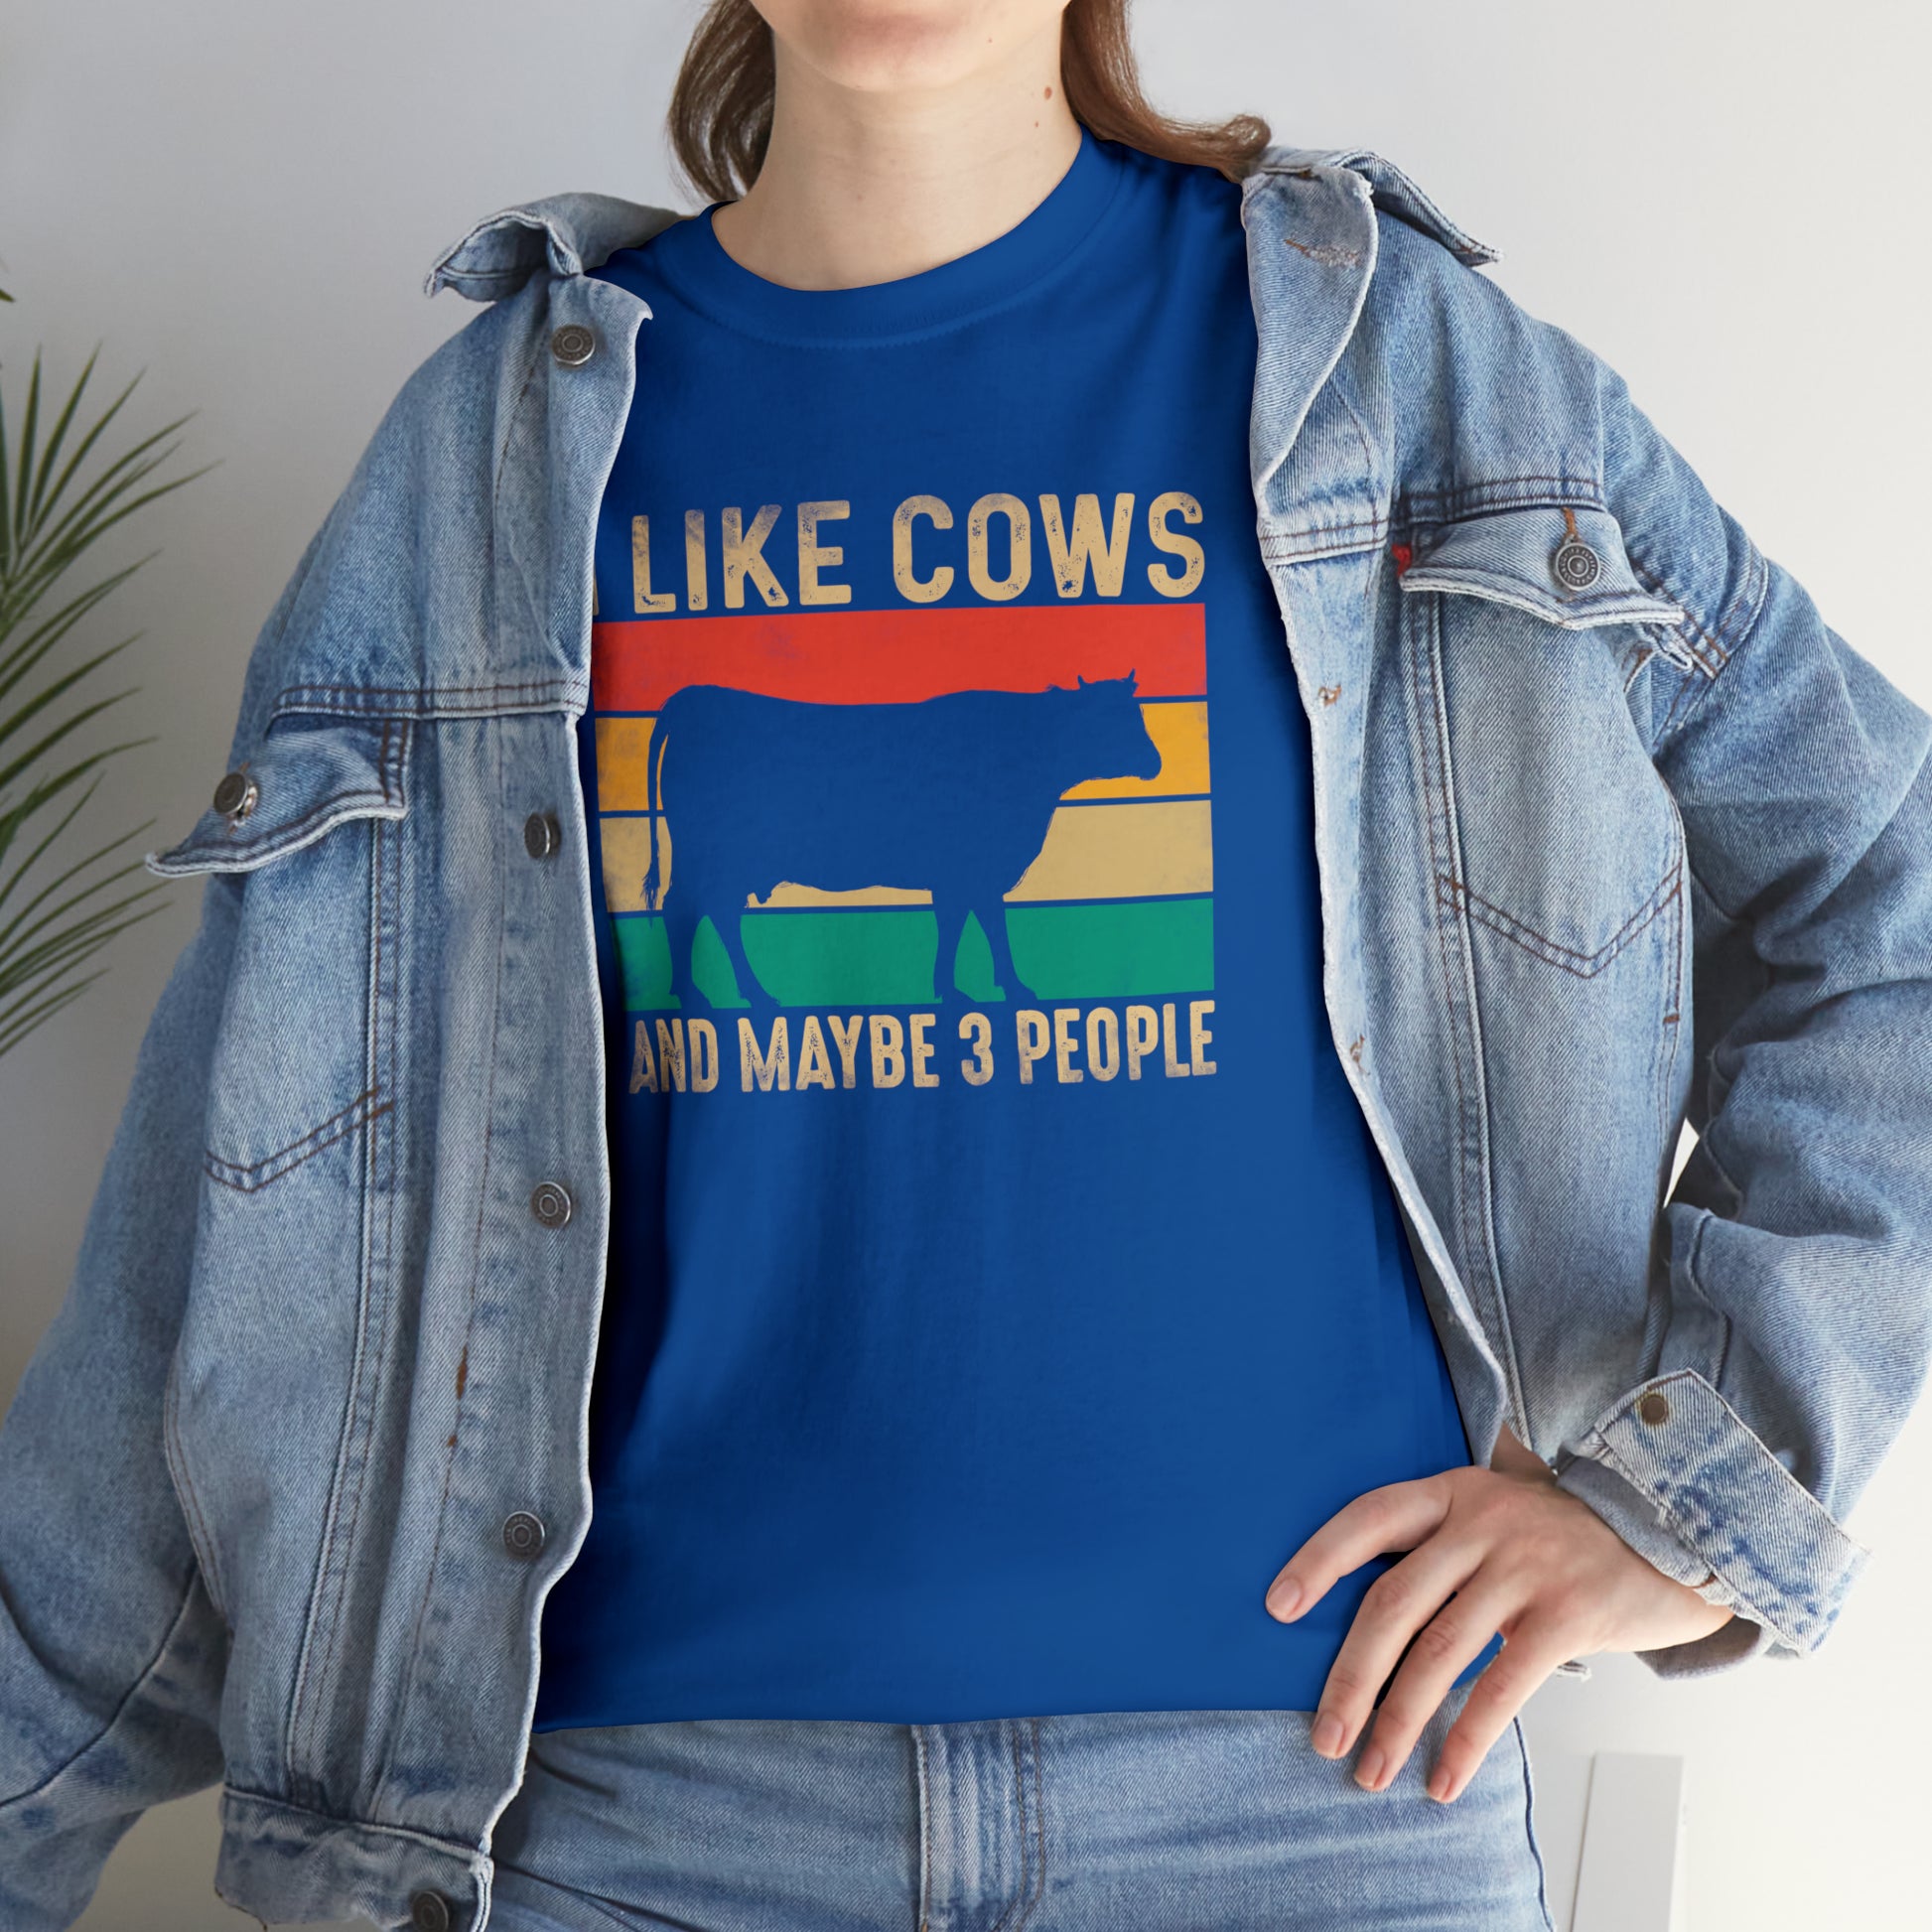 "I Like Cows & Maybe 3 People" T-Shirt - Weave Got Gifts - Unique Gifts You Won’t Find Anywhere Else!